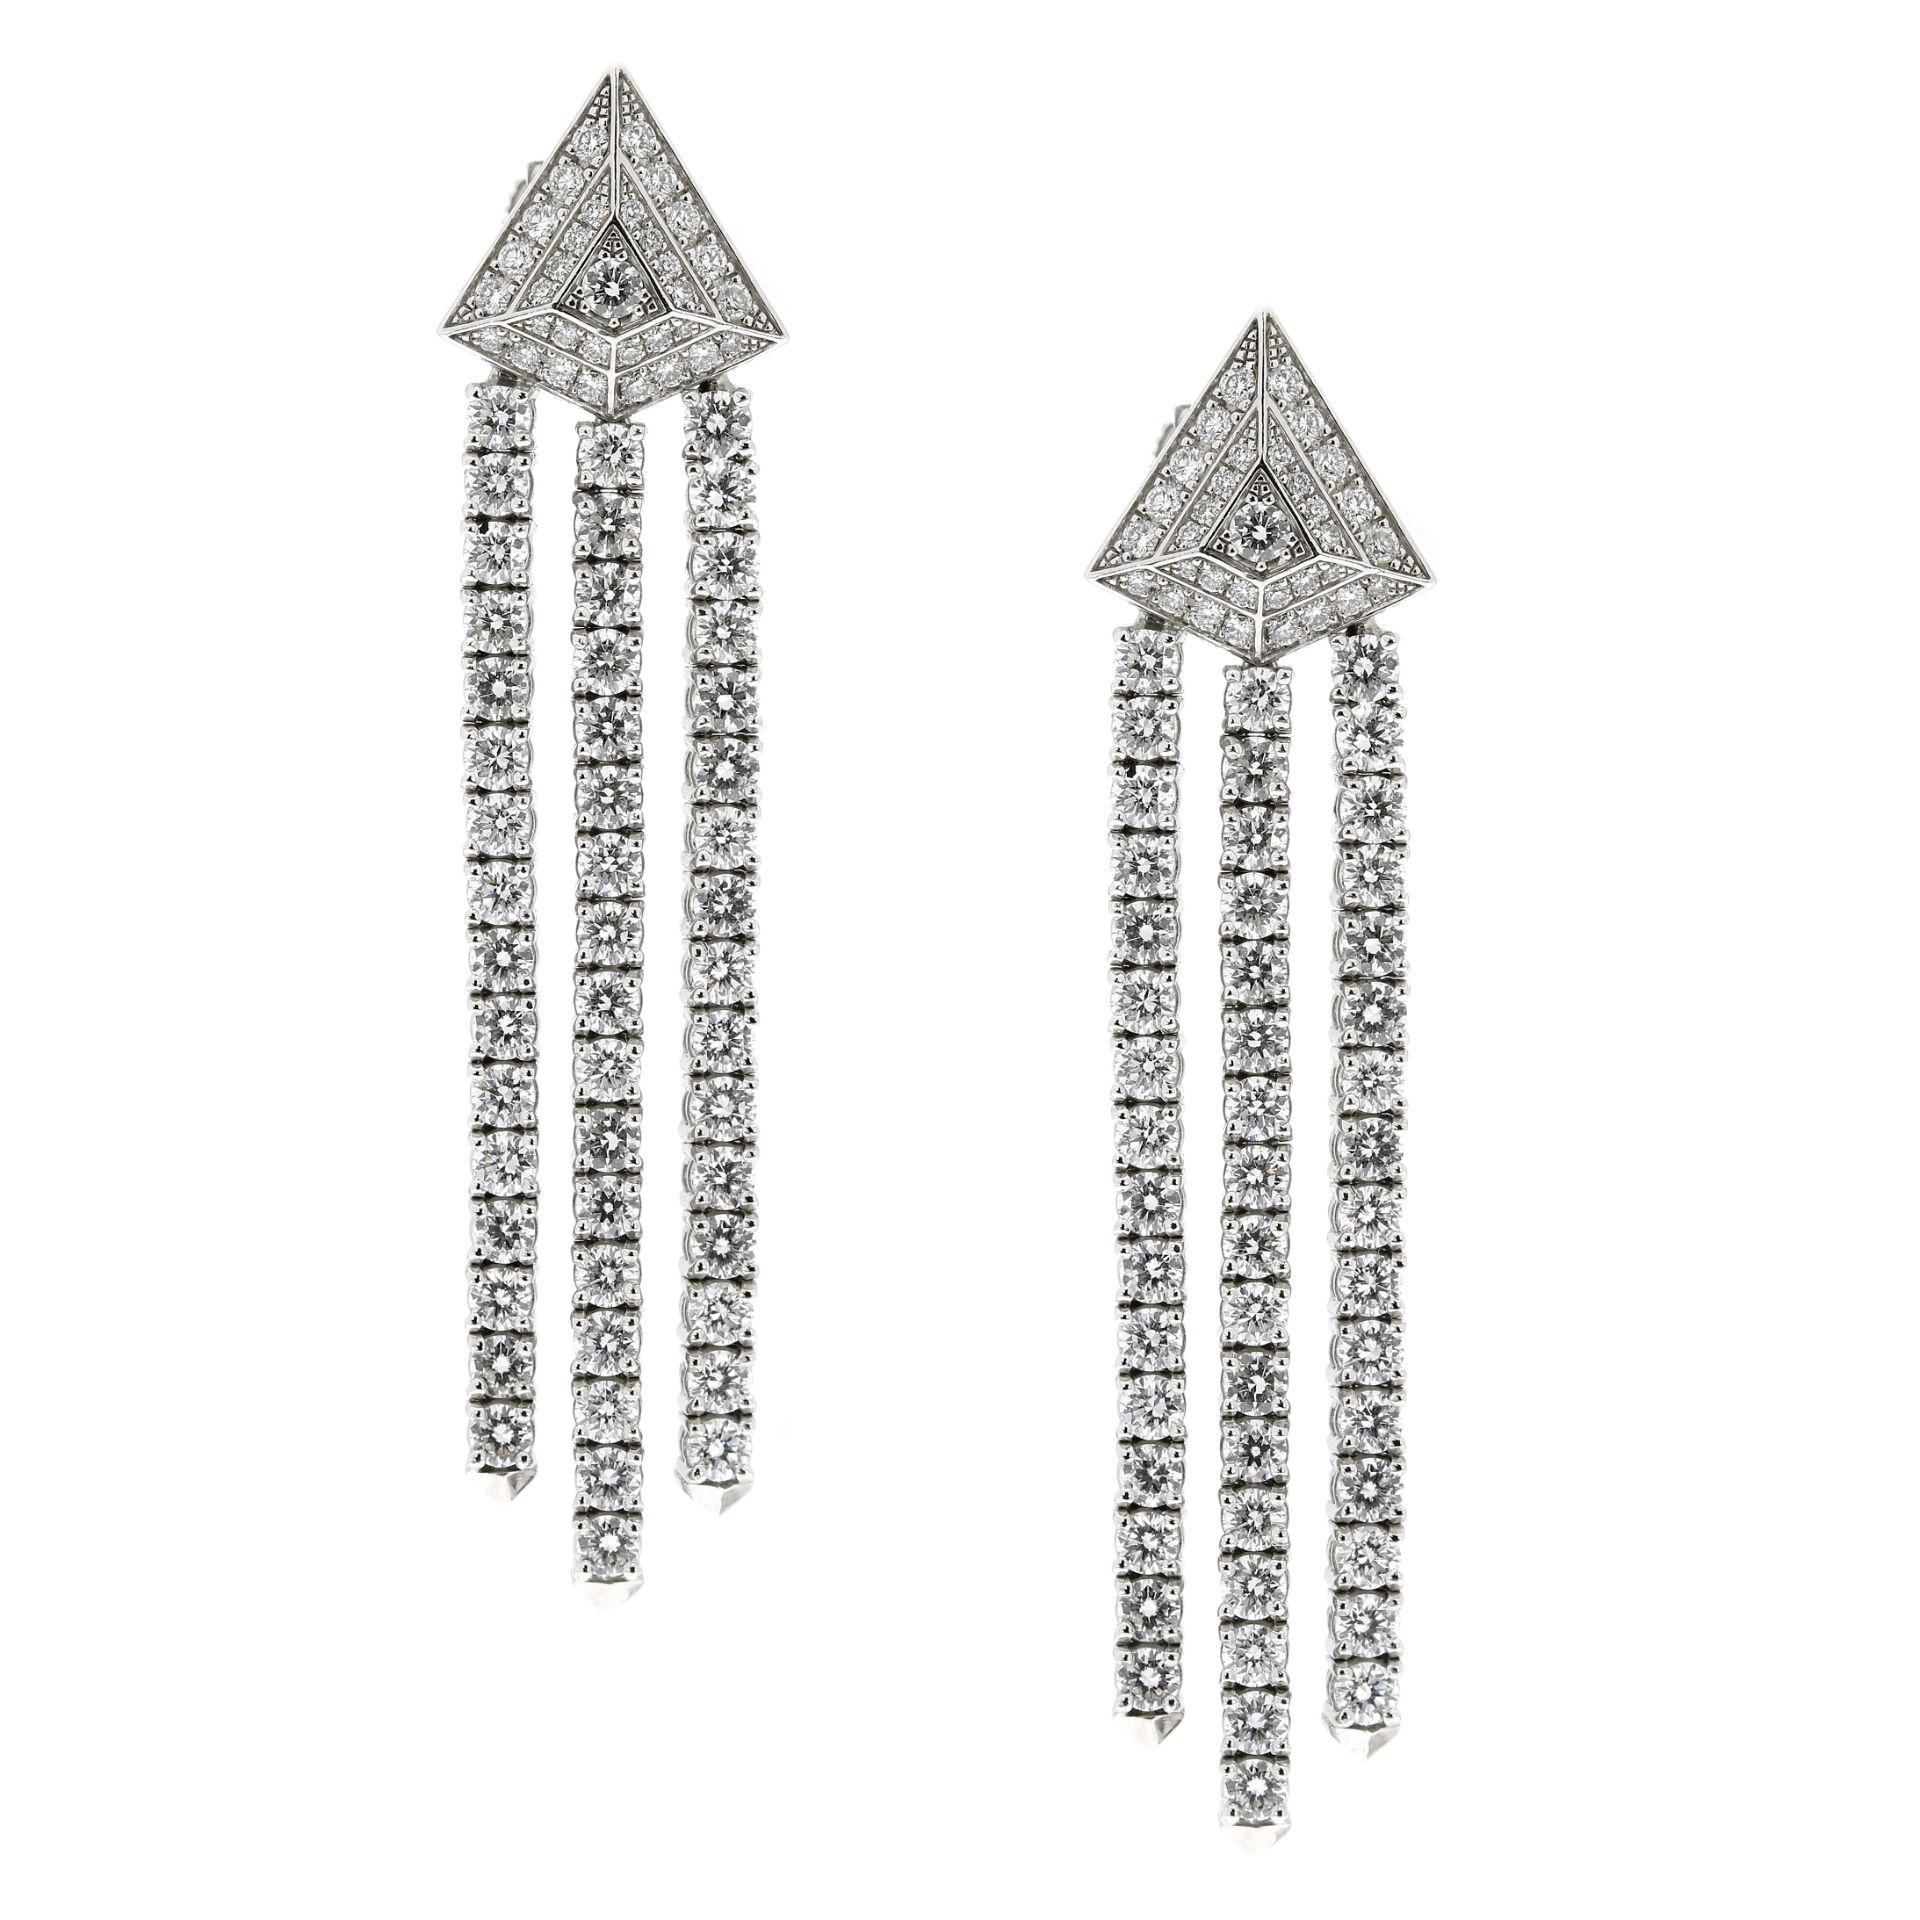 A PAIR OF DIAMOND TASSEL EARRINGS, PIAGET in 18ct white gold, each formed of a triangular motif